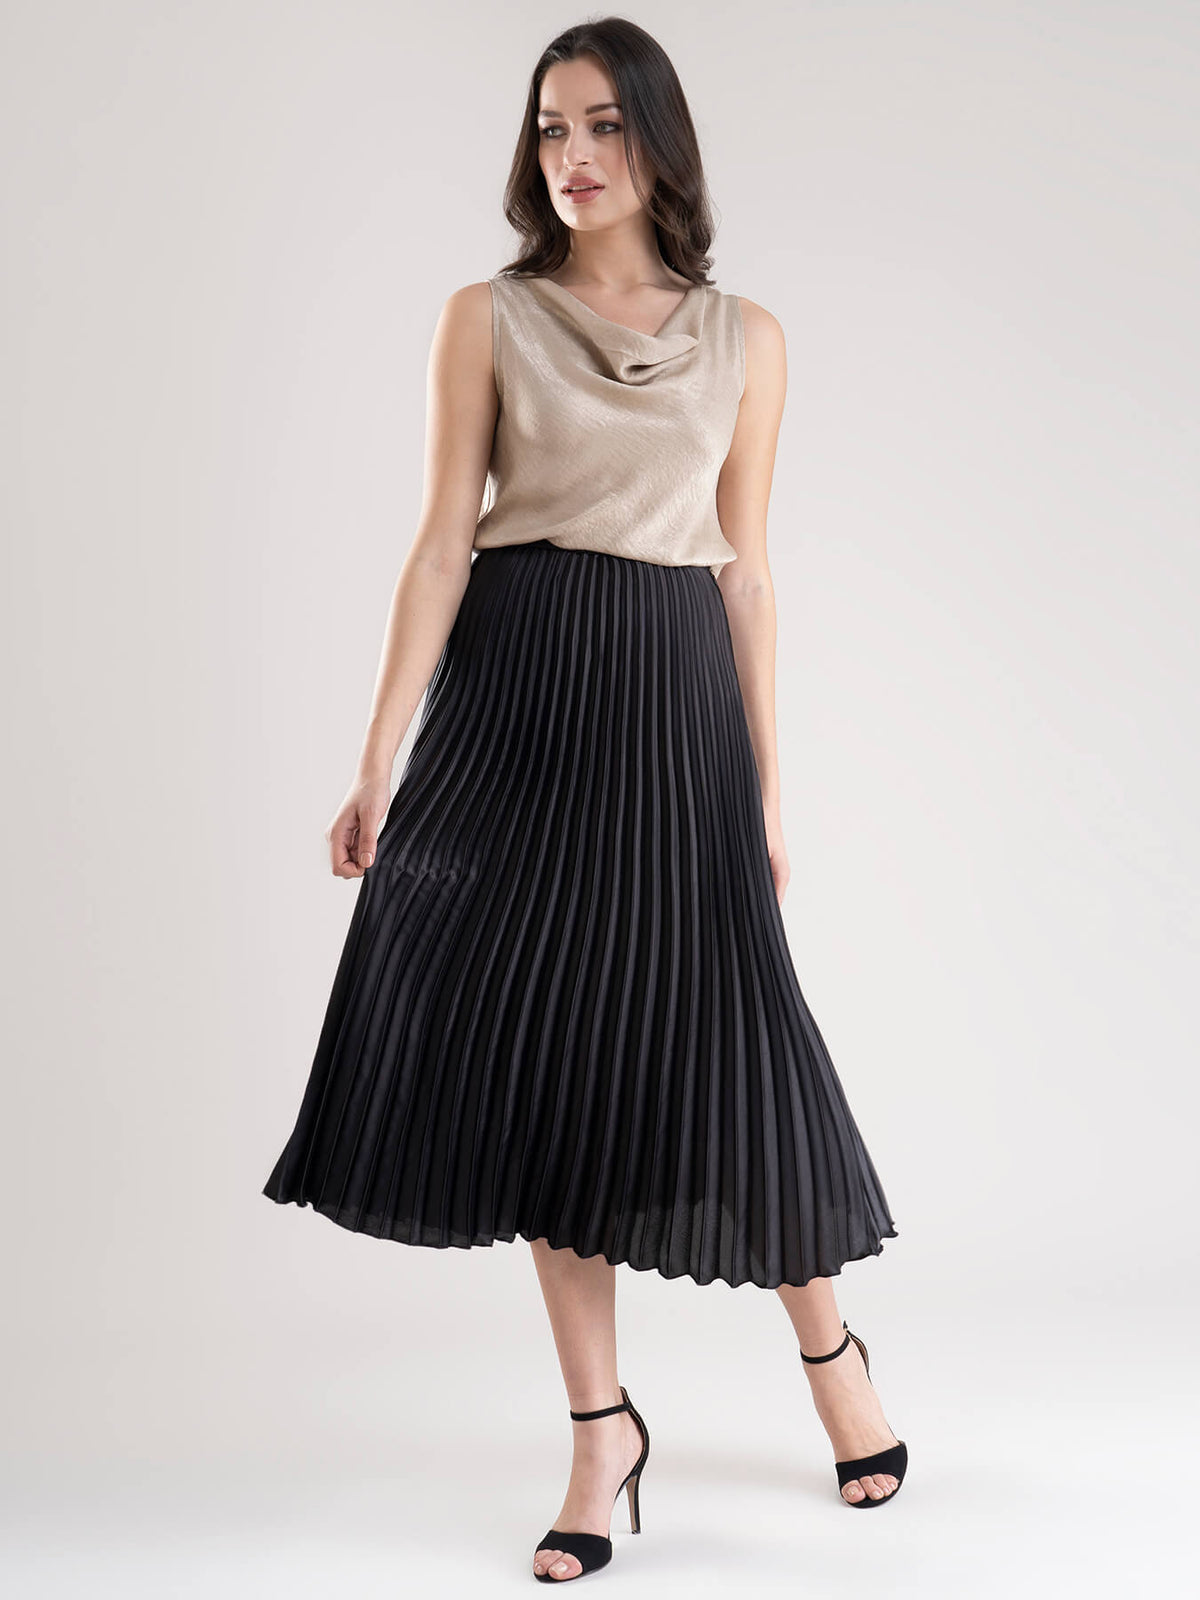 Satin Cowl Neck Top And Pleated Satin Skirt Co-ord - Beige And Black